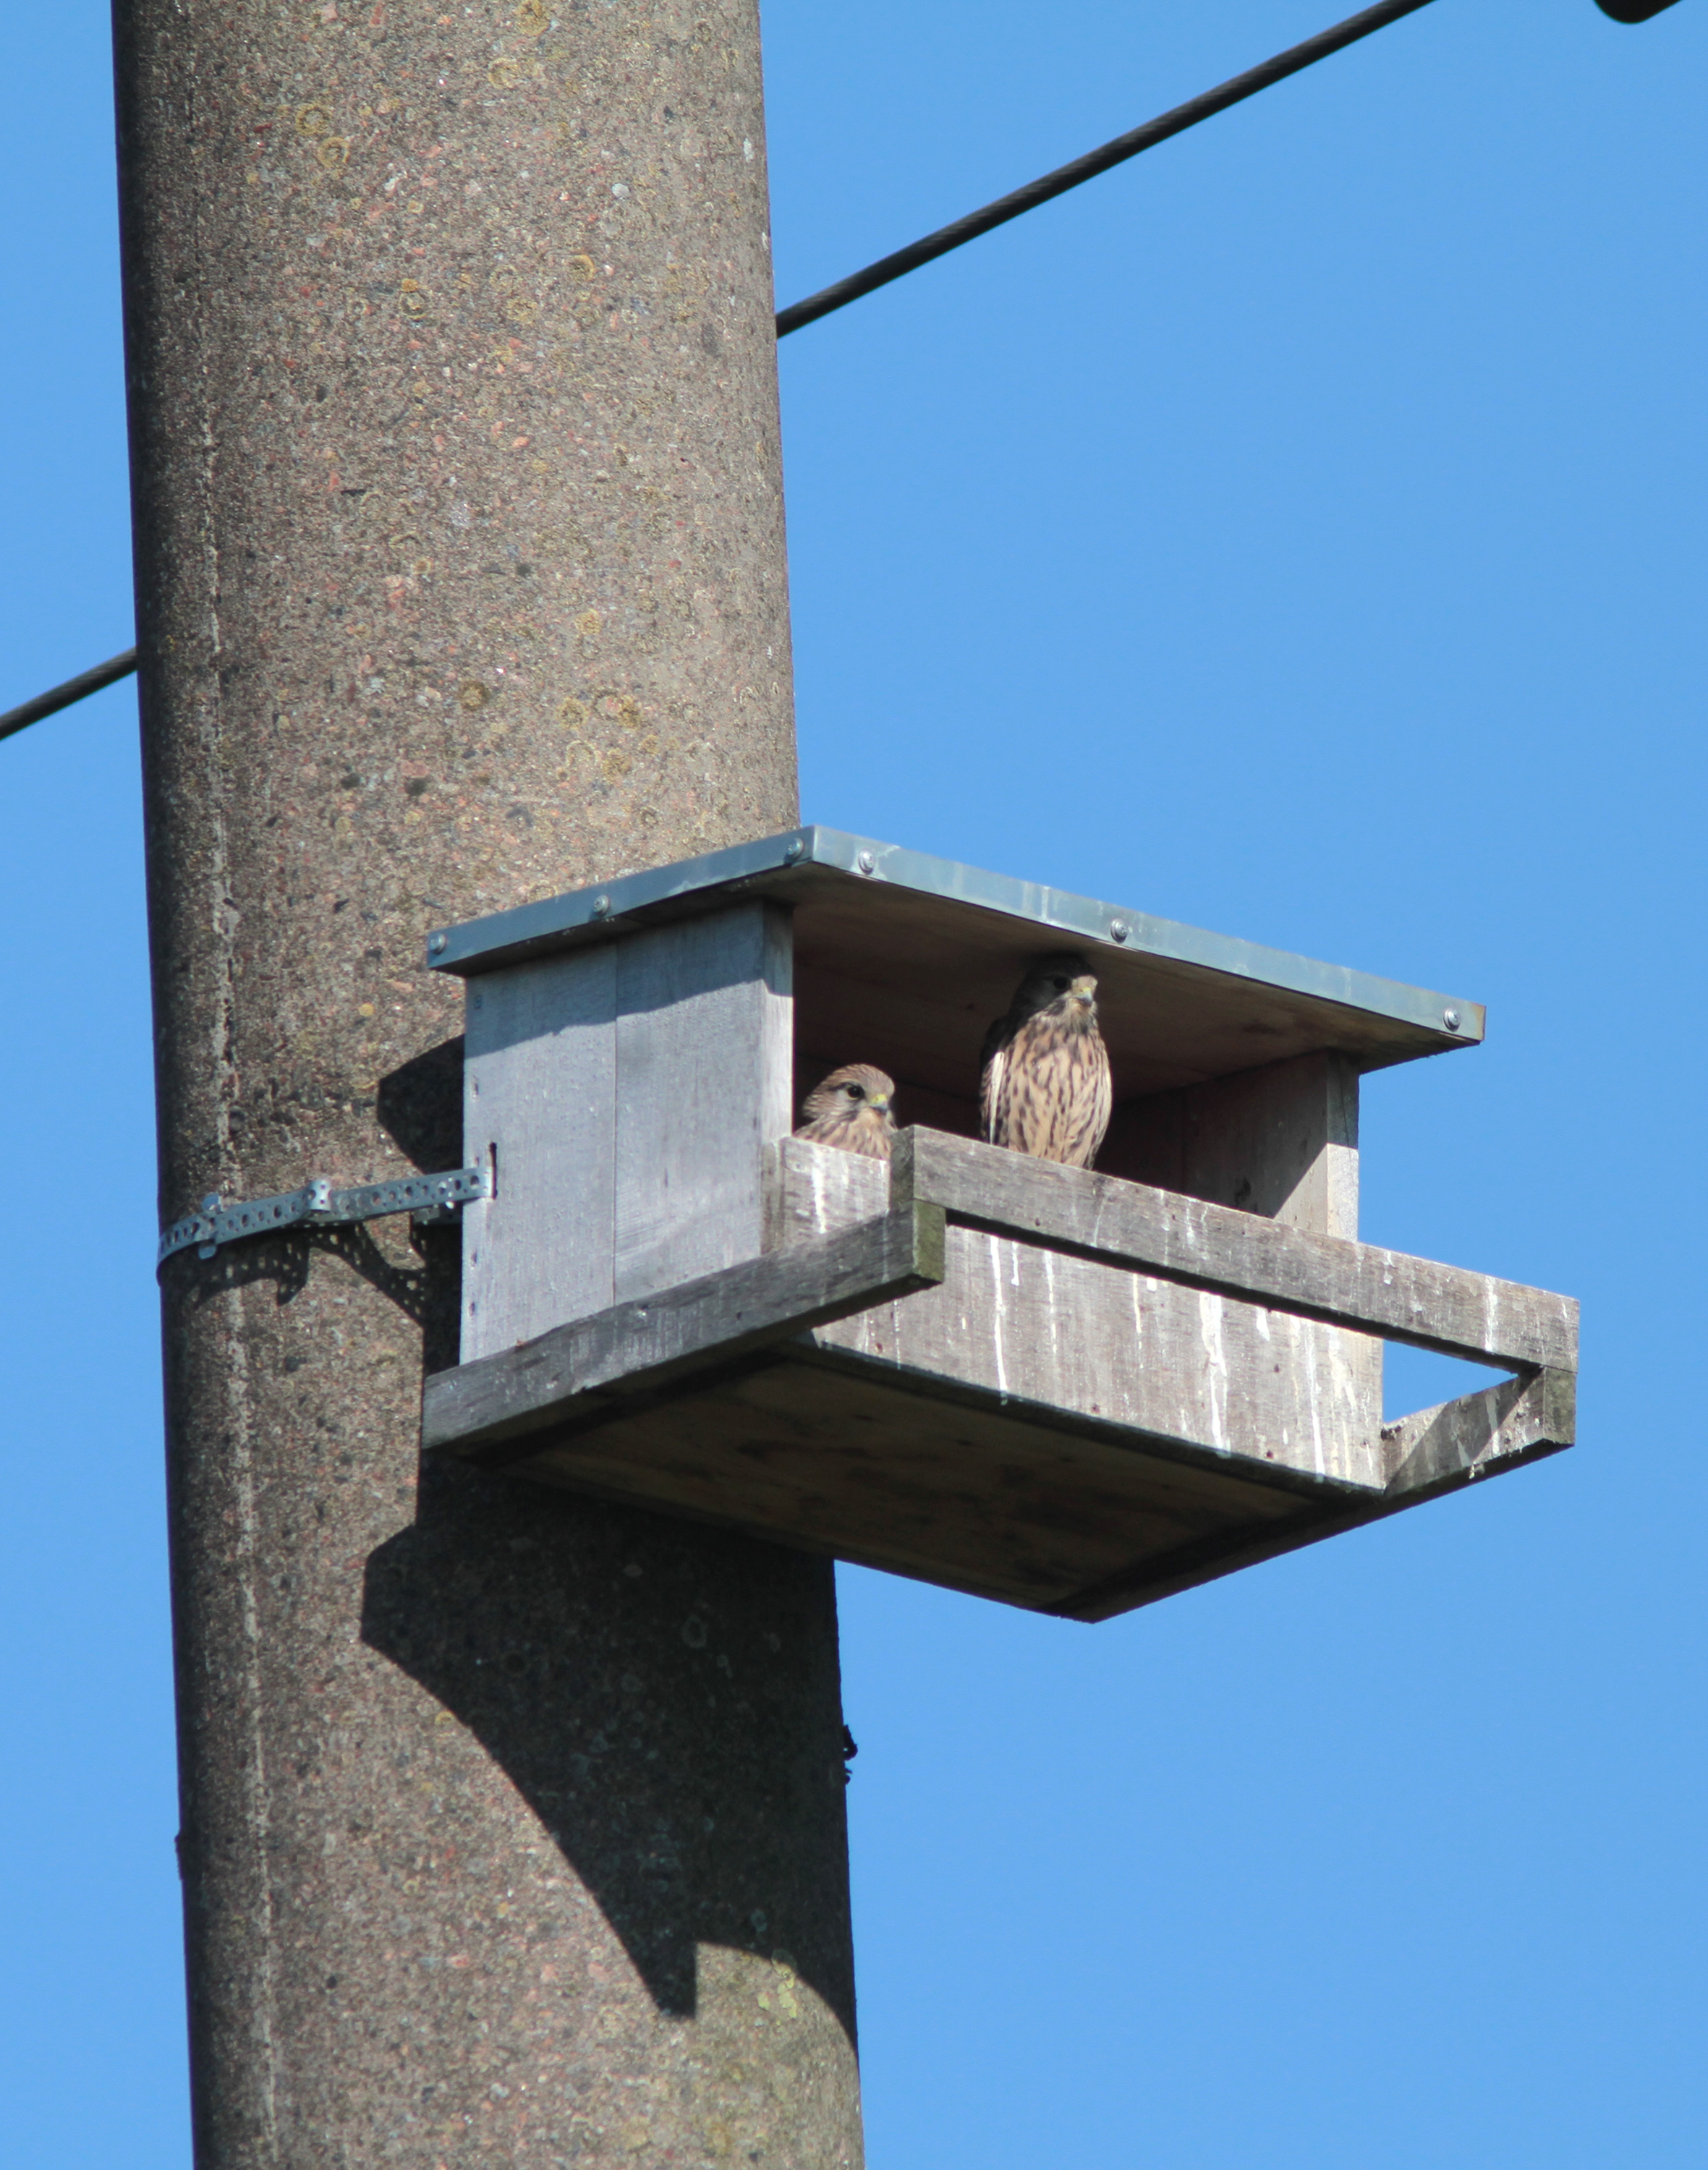 Overview of the Common Kestrels breeding season and occupation of nests in 2017